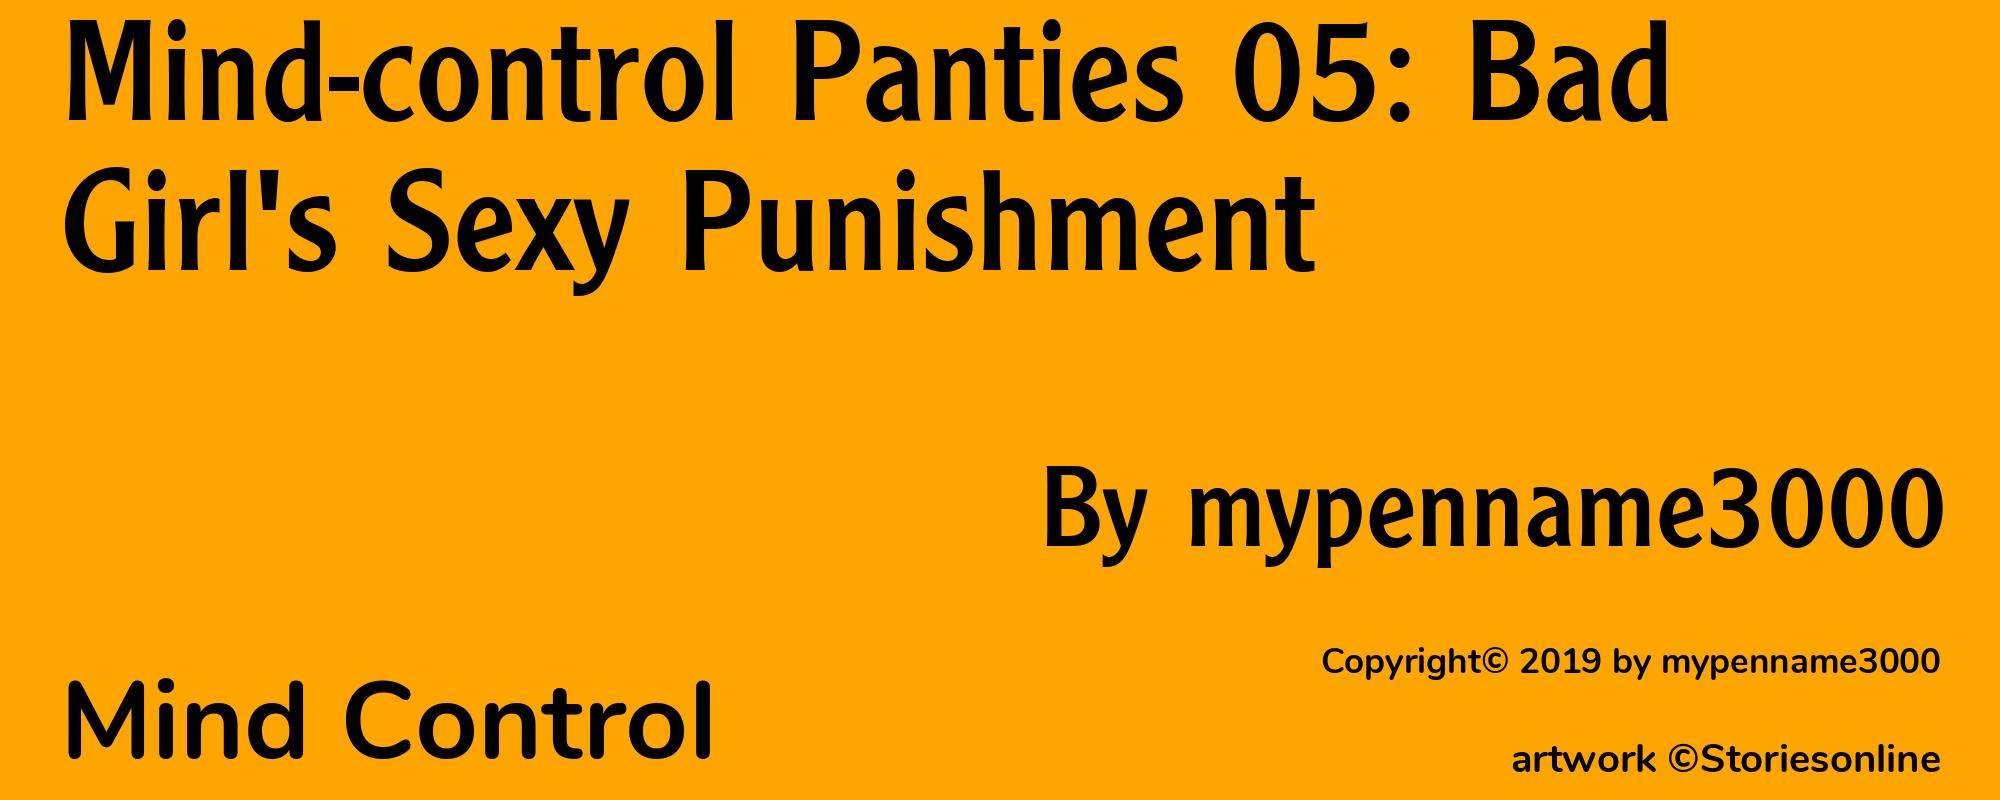 Mind-control Panties 05: Bad Girl's Sexy Punishment - Cover